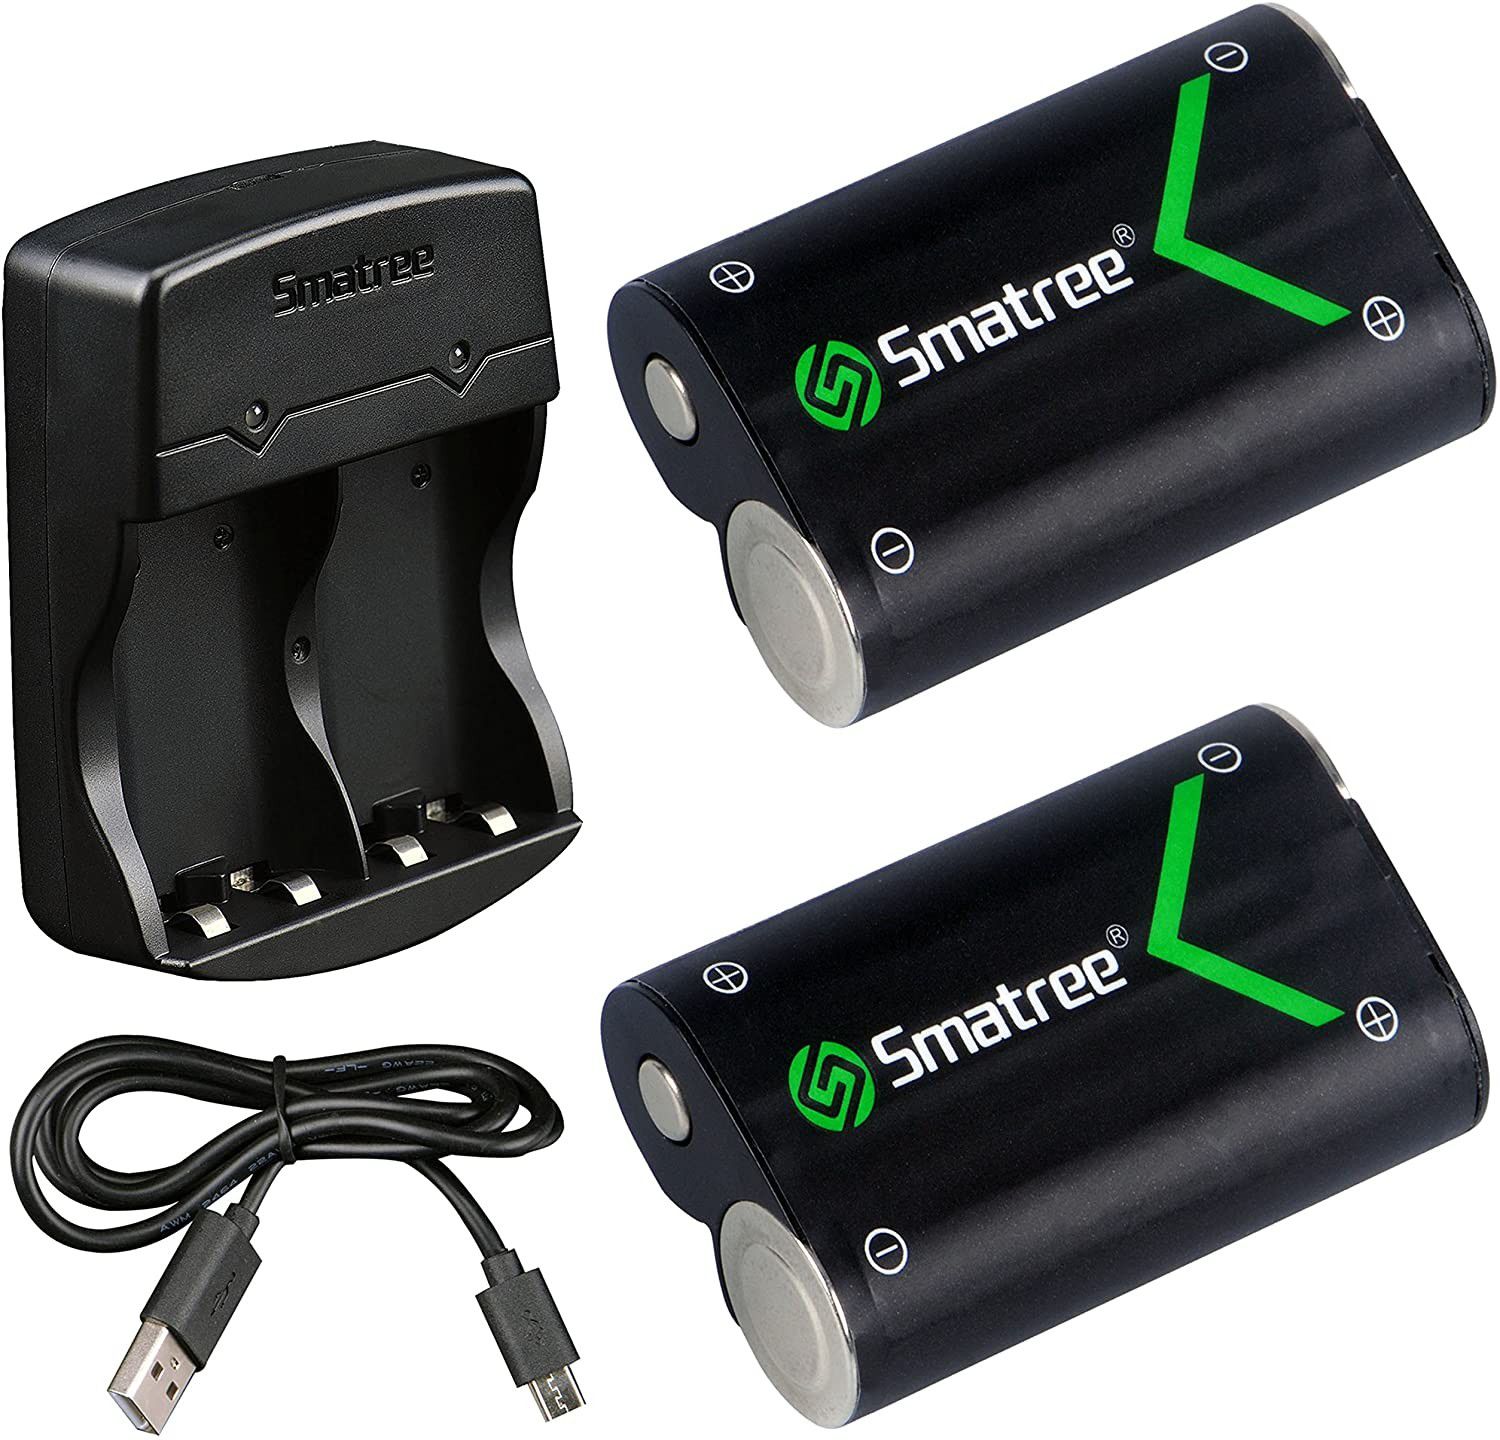 Smatree Rechargeable 2 x 2000mAh Batteries Charger Xbox One /Xbox One S